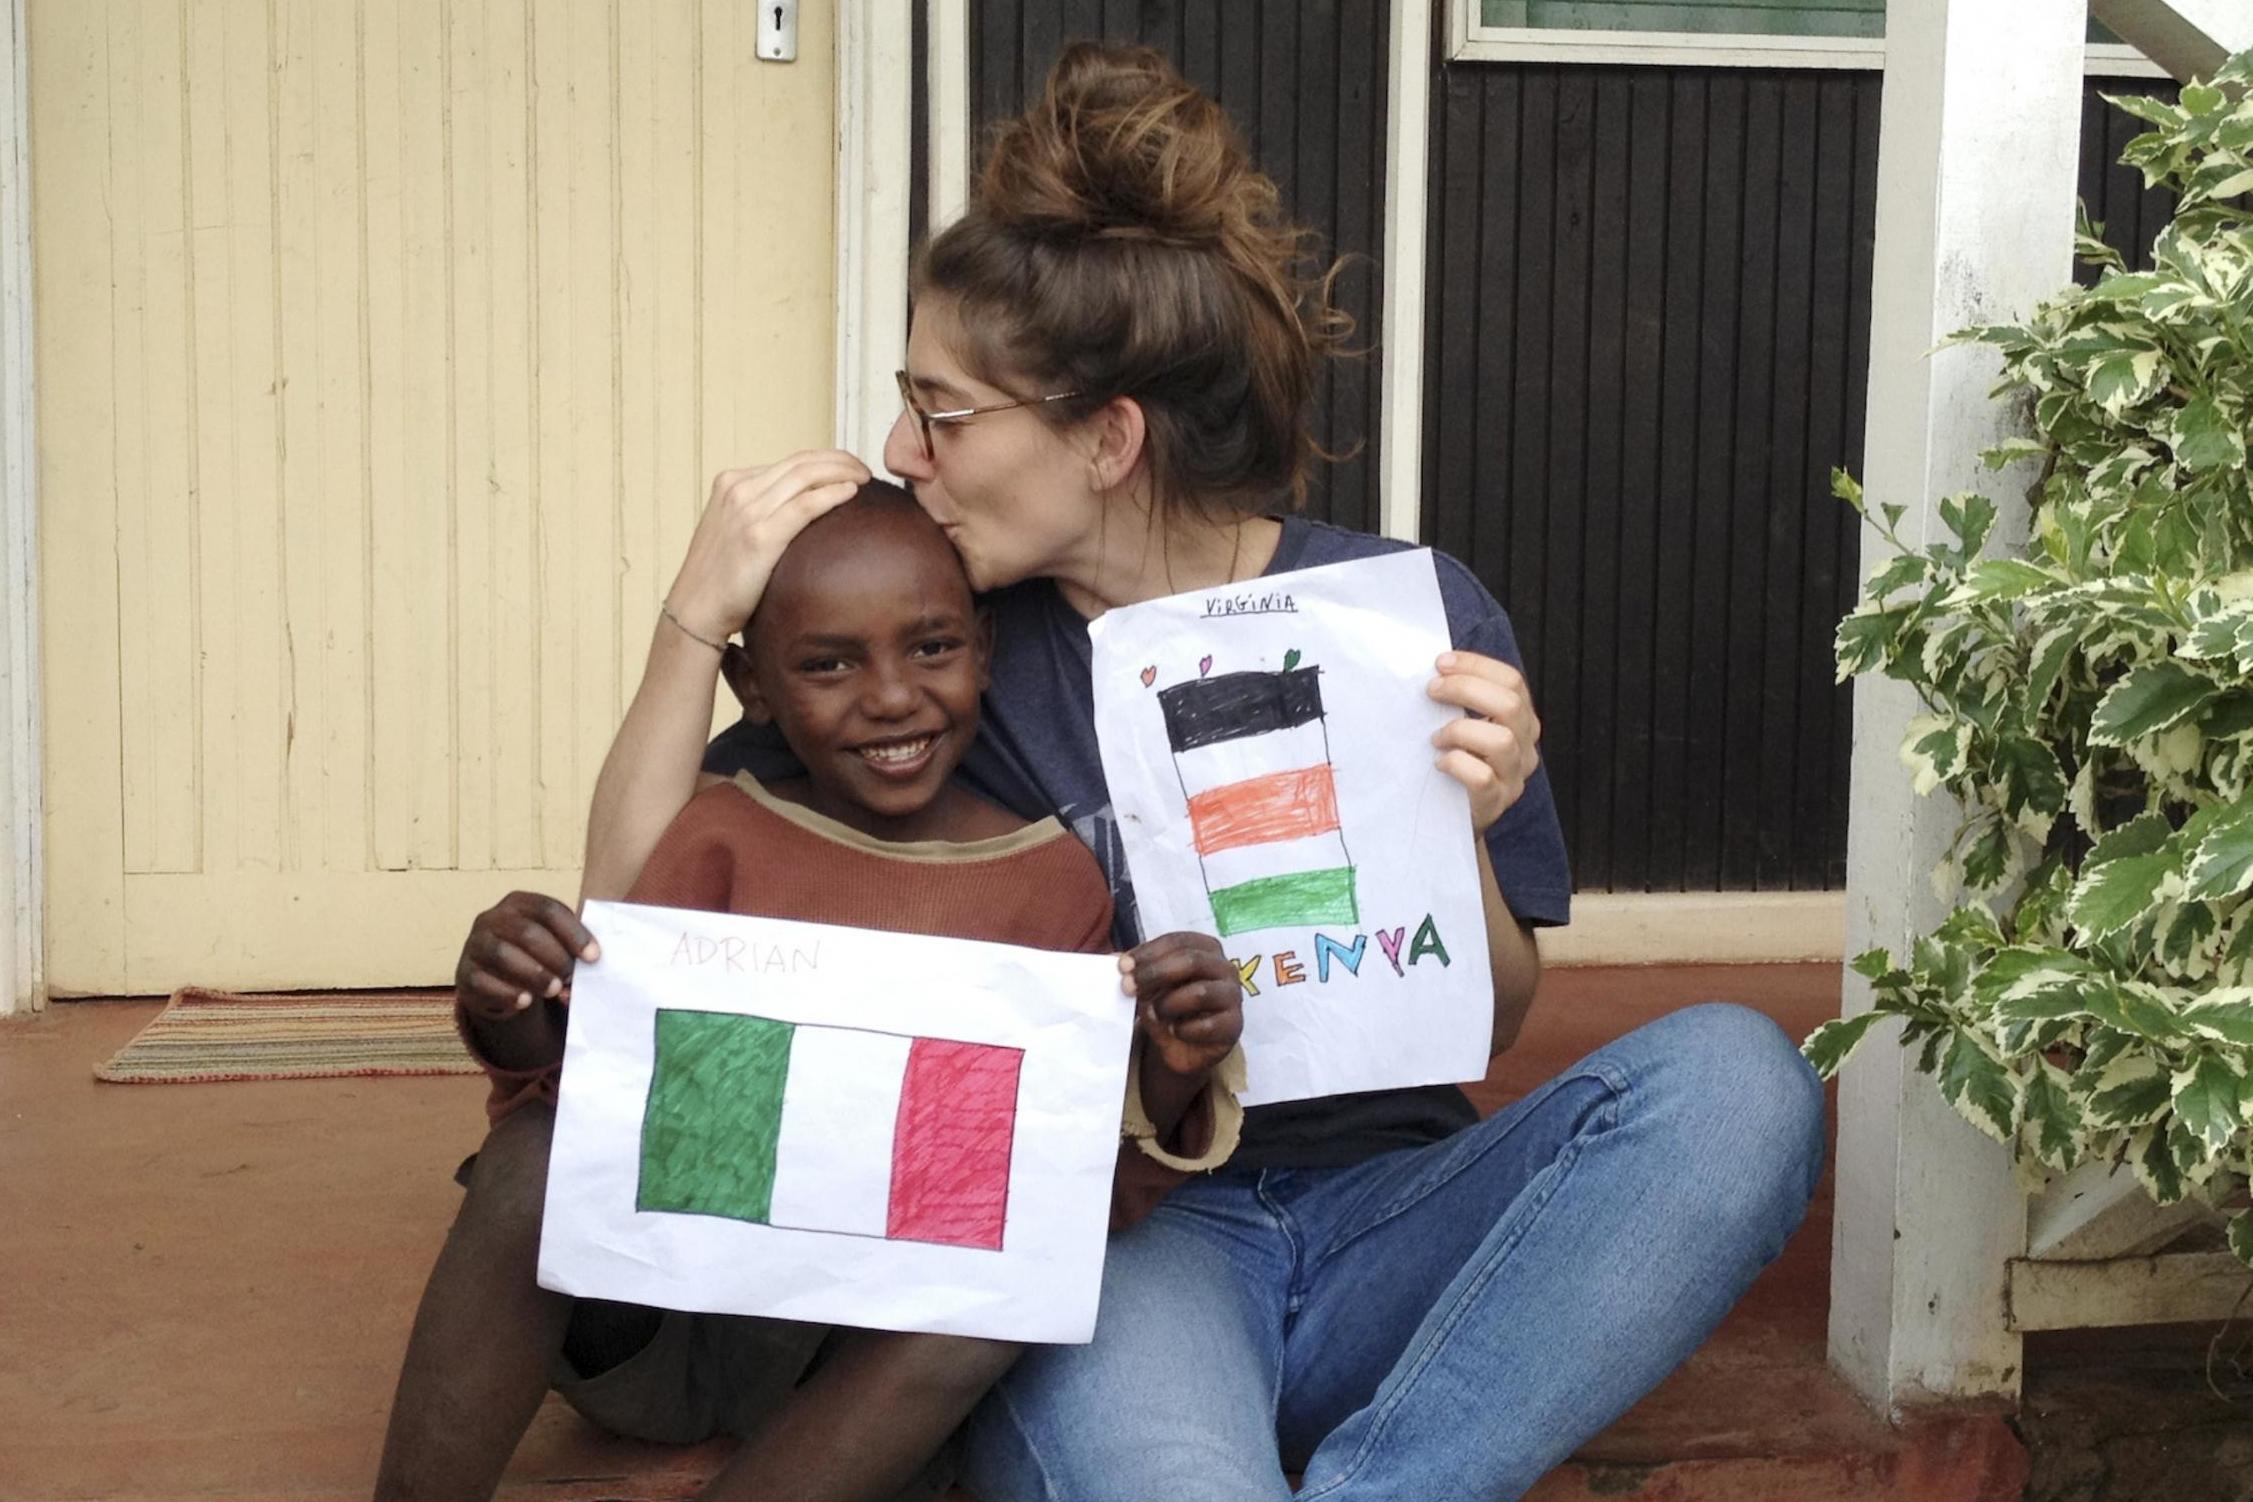 Virginia Chimenti?volunteered in Mexico, Peru, Namibia and Chile – but fell in love with Africa